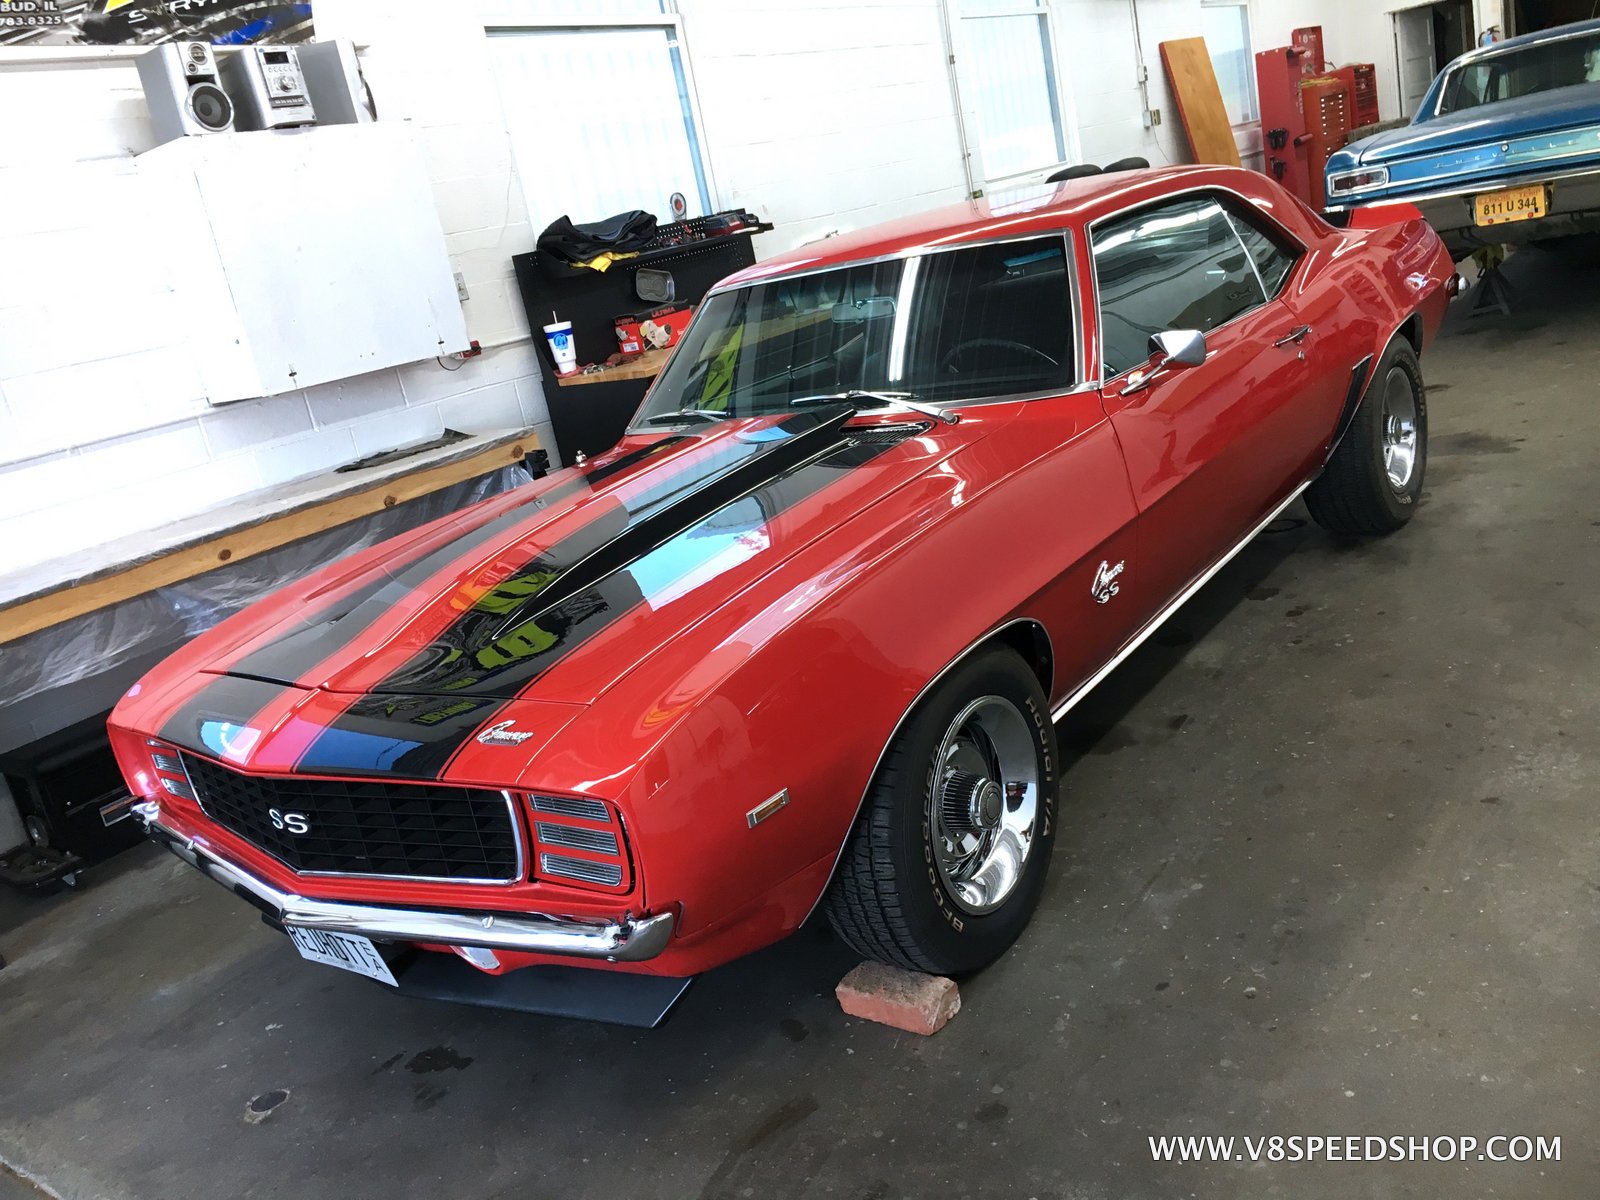 1969 Chevrolet Camaro Drivability Improvements at the V8 Speed and Resto Shop